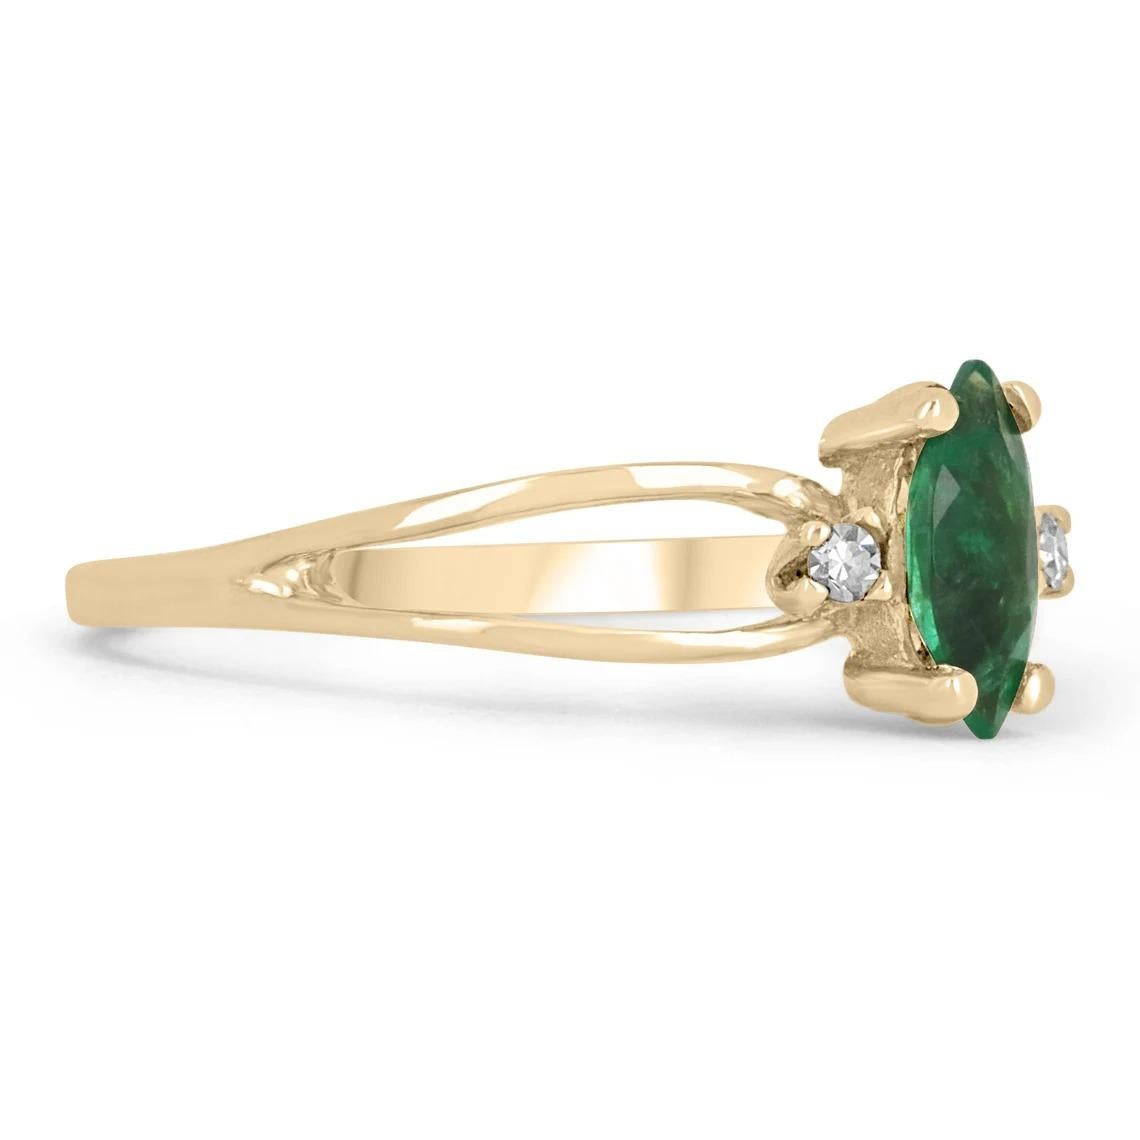 A petite, emerald and diamond three-stone ring. The center stone has a natural 0.35-carat, marquise-cut emerald. Showcasing a medium green color, and good luster. Accented on the sides are two baby diamonds, completing the three-stone look!

Setting